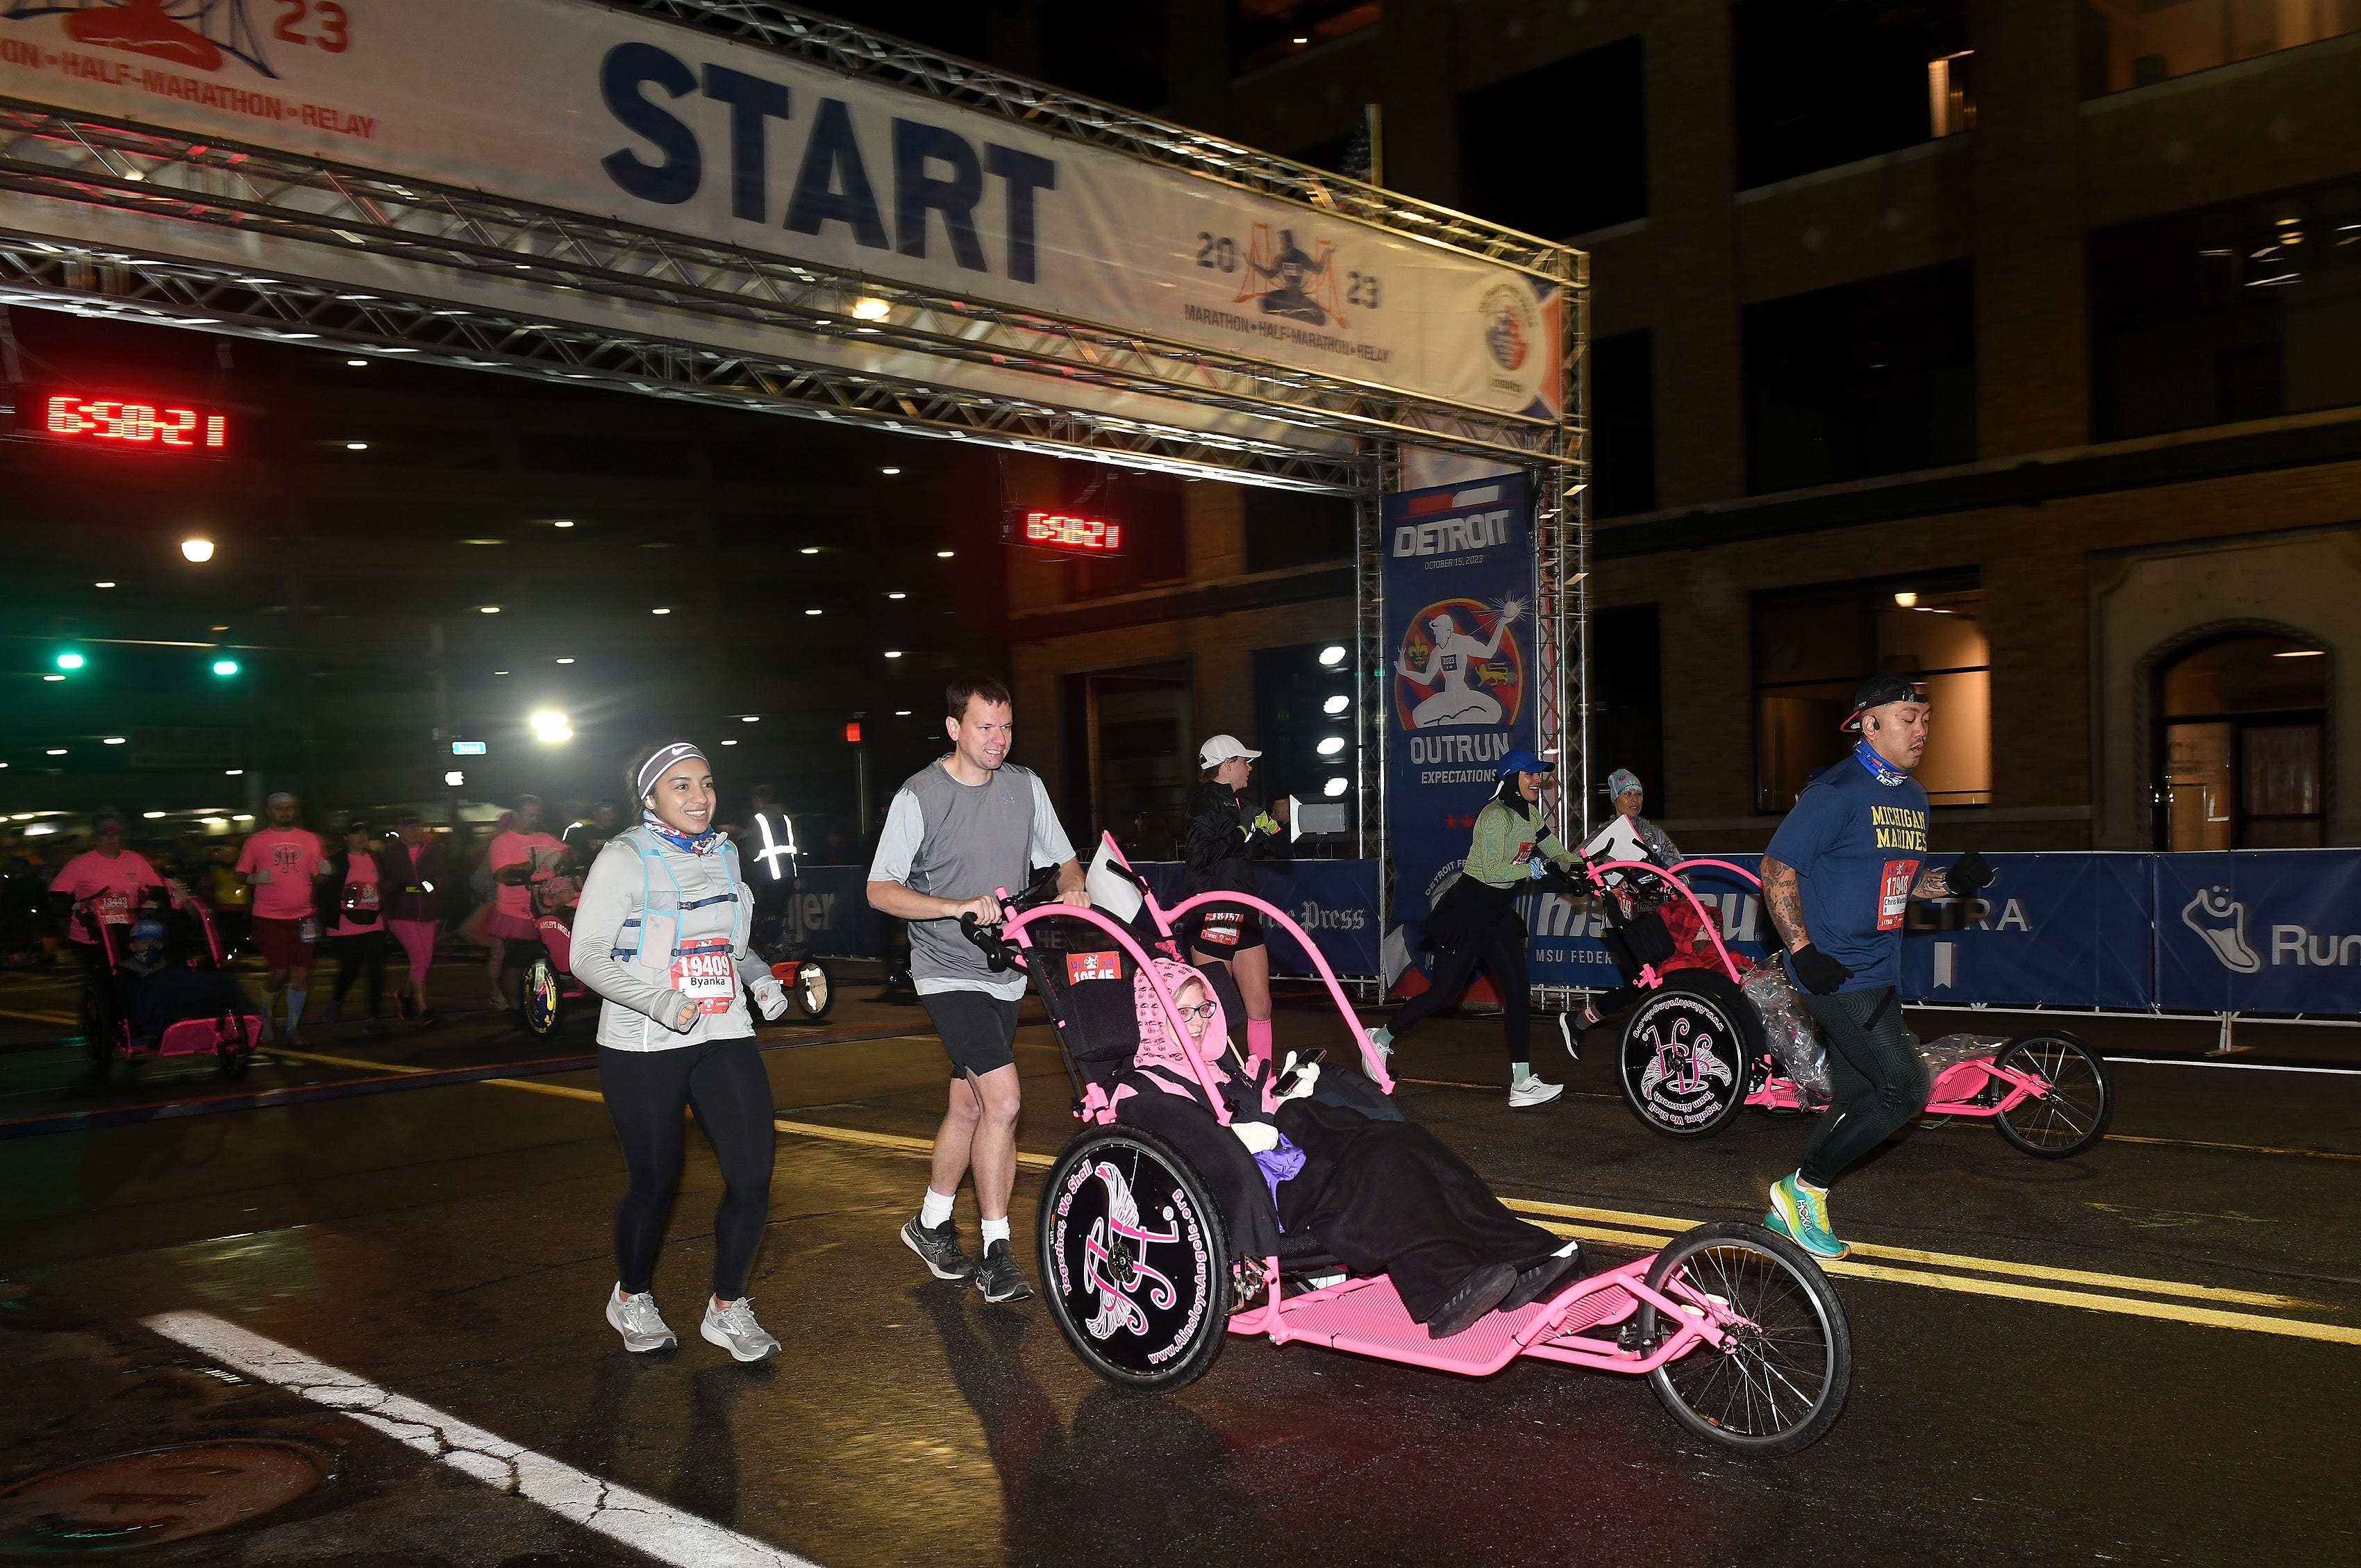 Participants in the wheelchair division at the start of the Detroit Free Press Marathon in Detroit on Oct. 15, 2023.